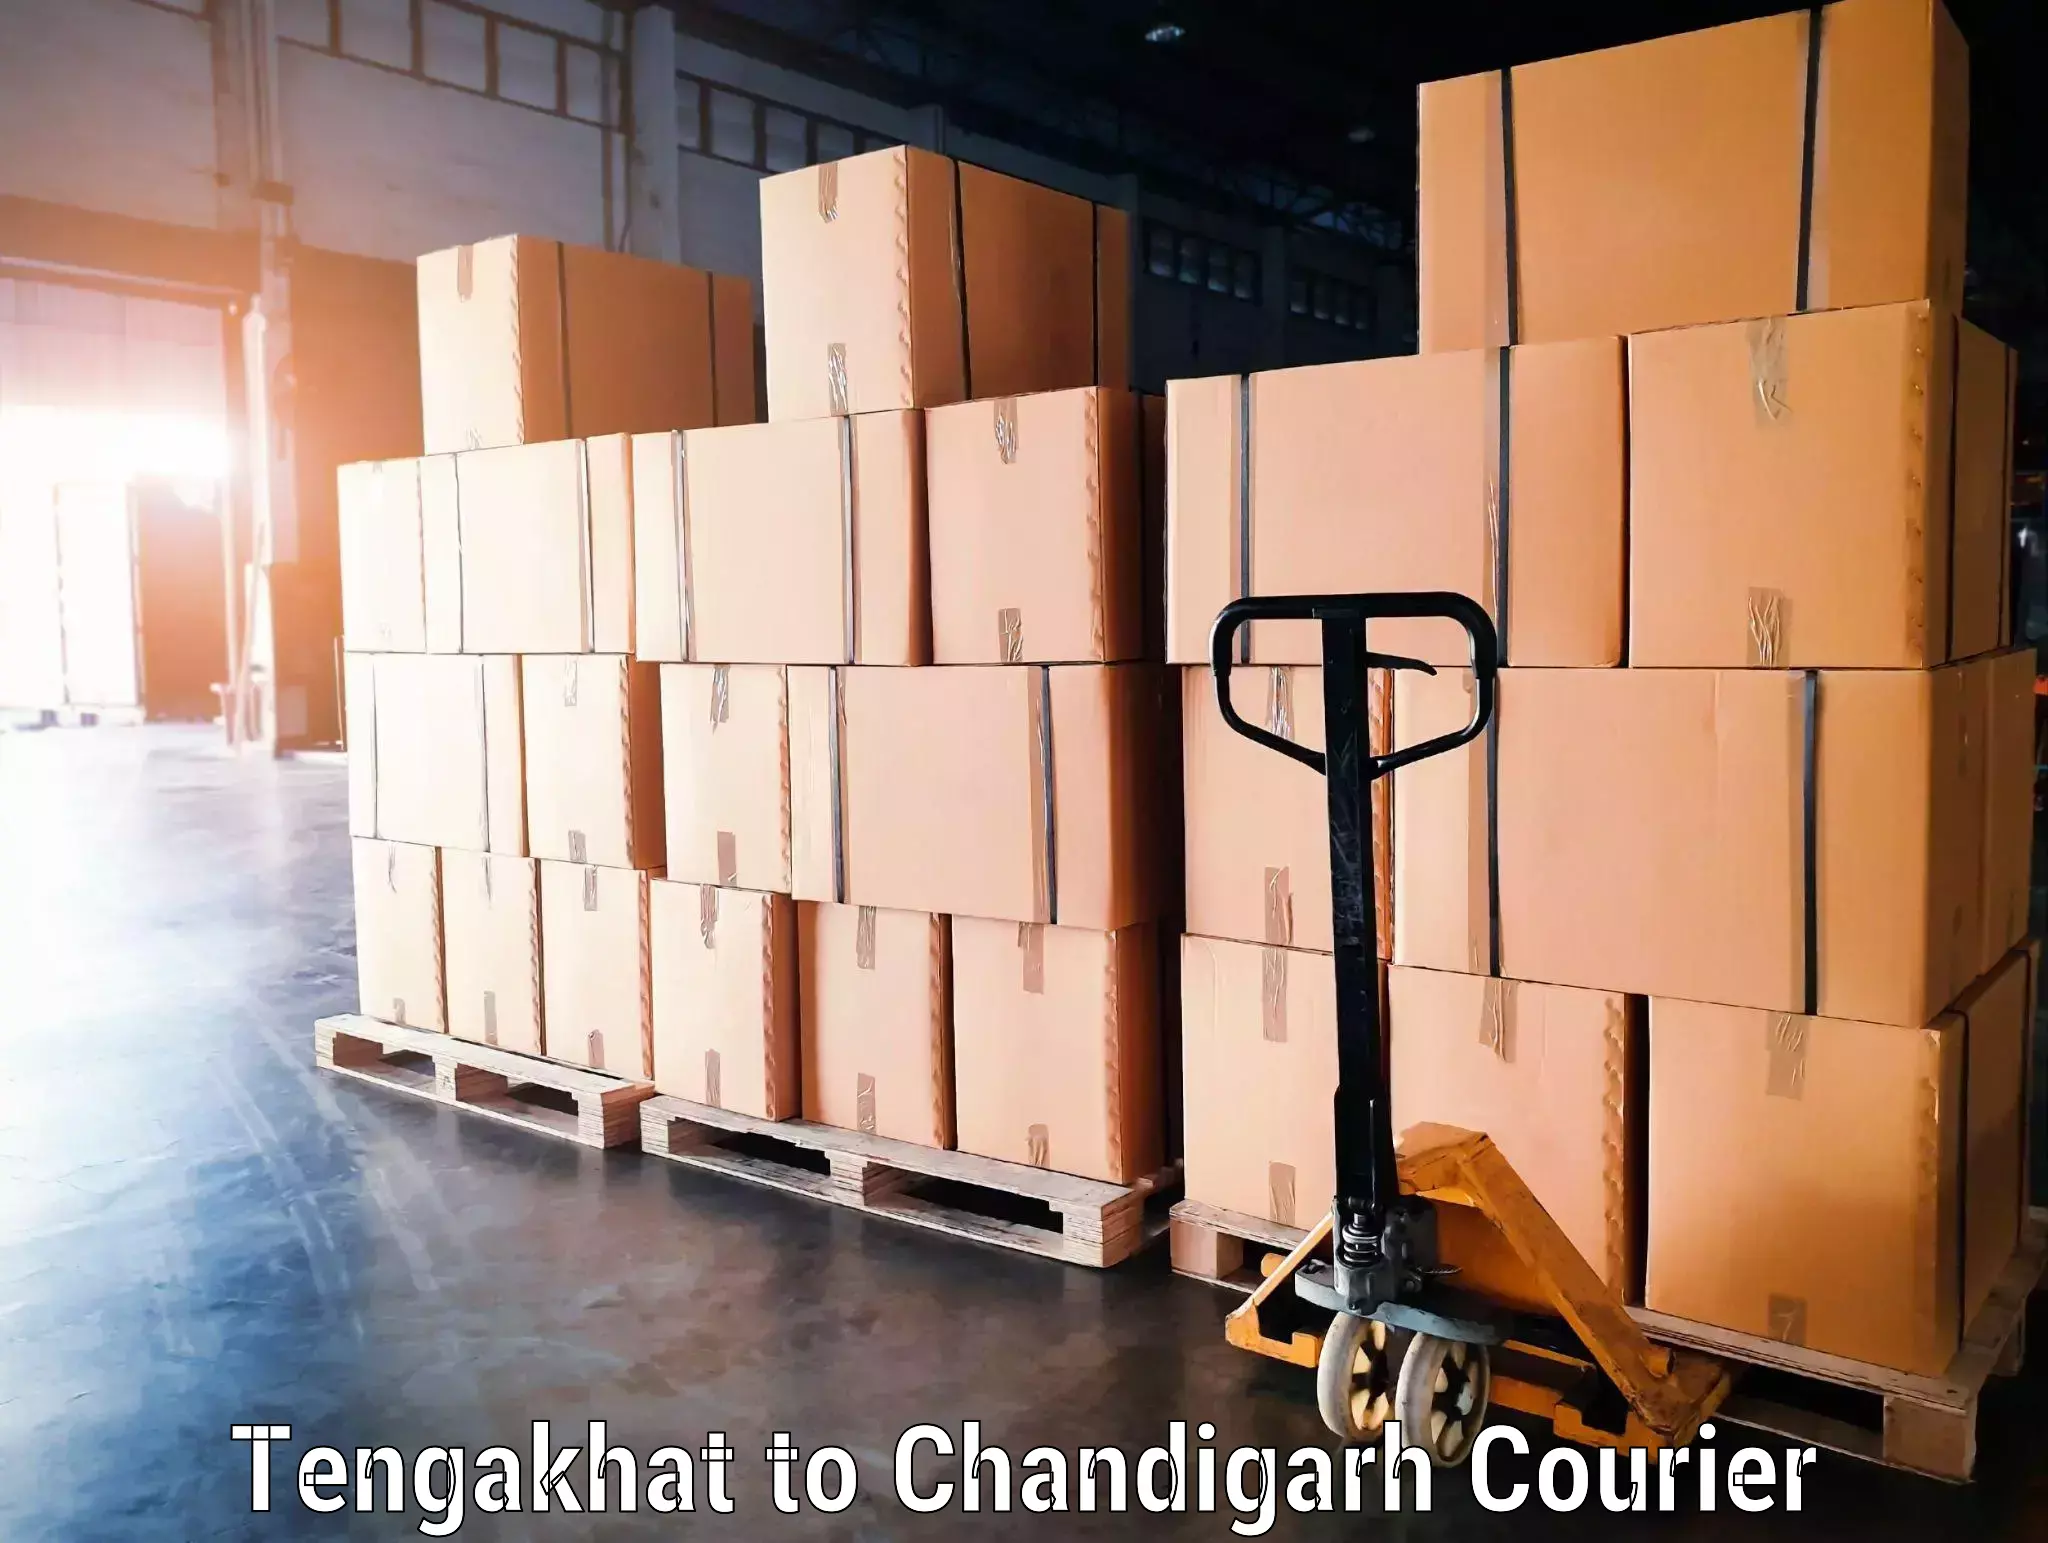 Baggage shipping experts Tengakhat to Chandigarh